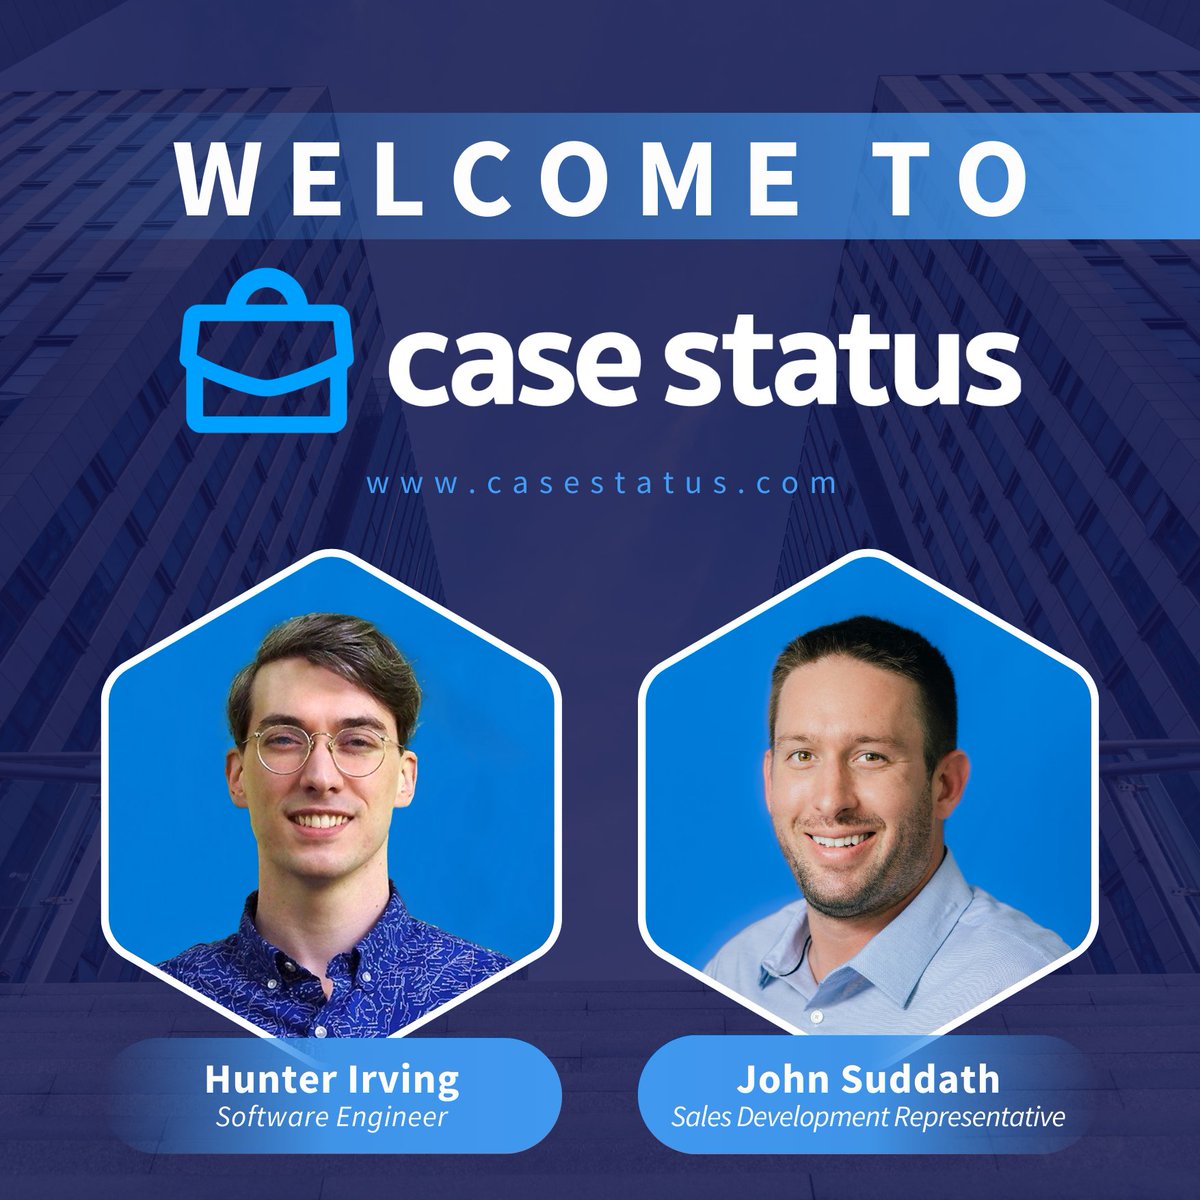 Meet our new team members, Hunter Irving and John Suddath!🌟

Join us in welcoming Hunter and John to the Case Status team! 

#CaseStatusTeam #NewHires #WelcomeToTheTeam #CaseStatus